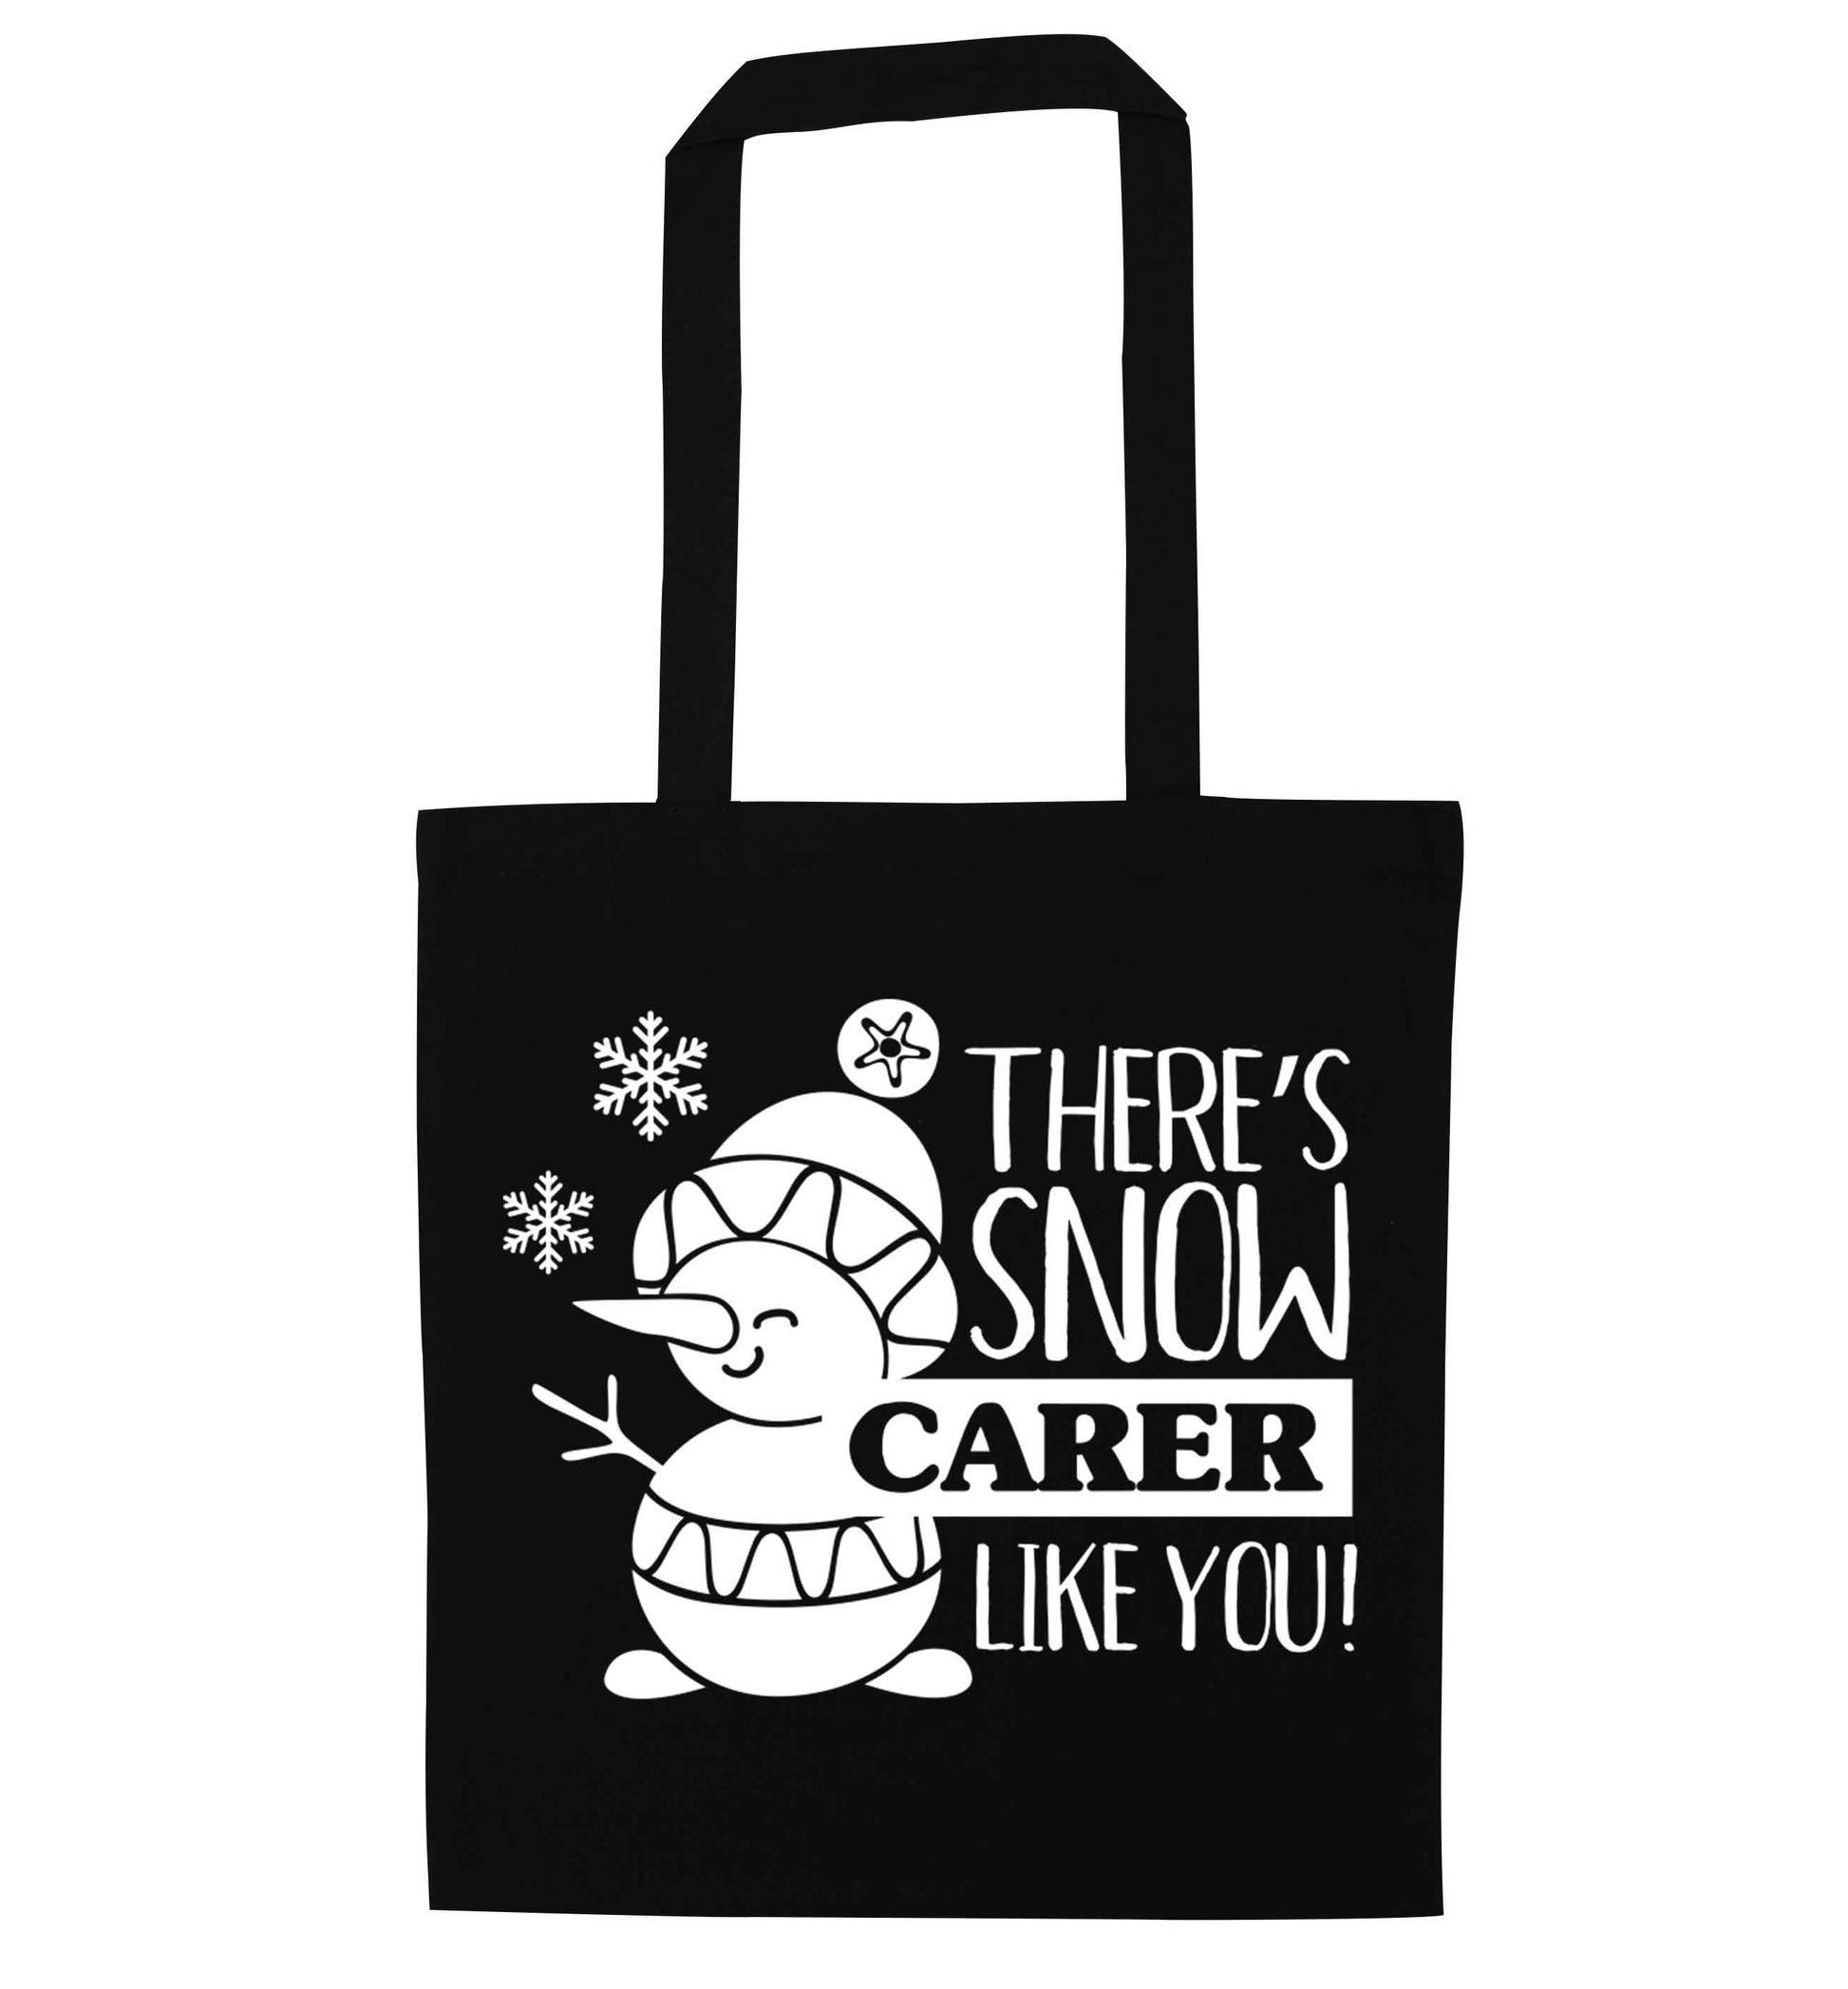 There's snow carer like you black tote bag